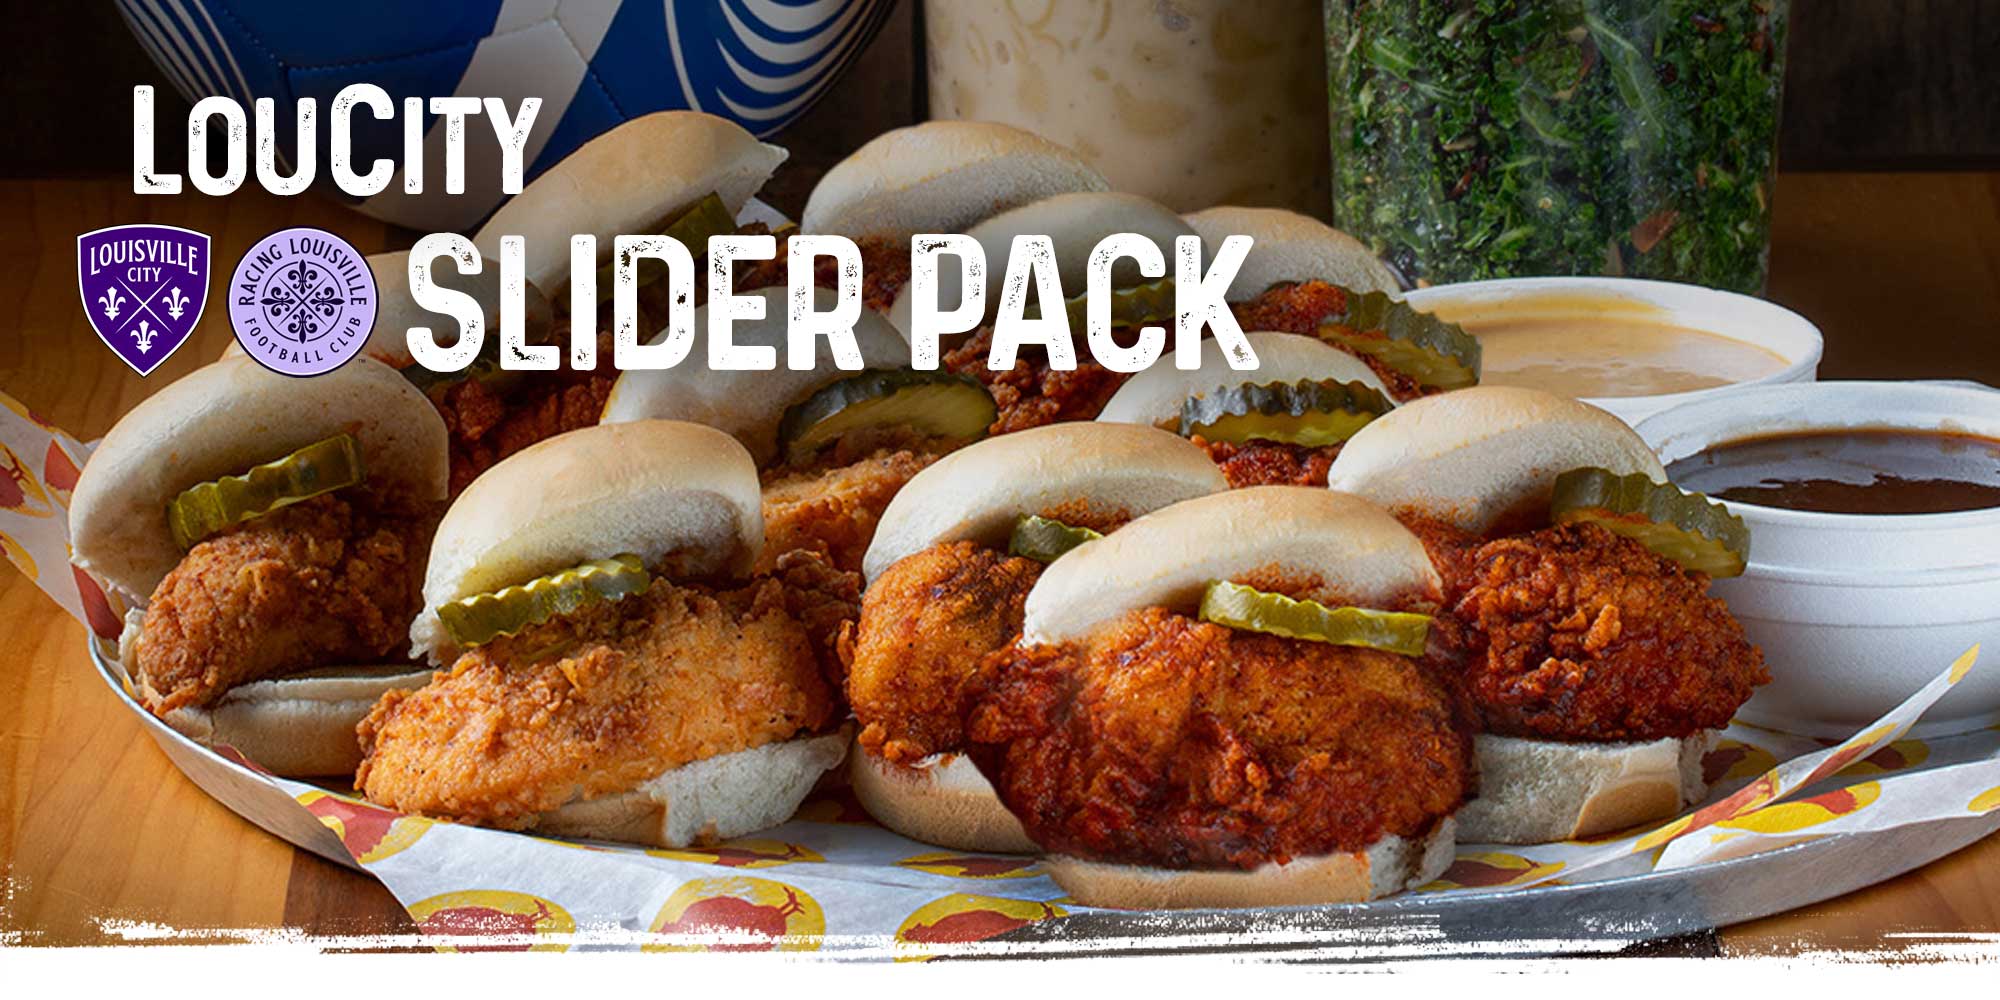 Joella's LouCity Slider Pack limited time special